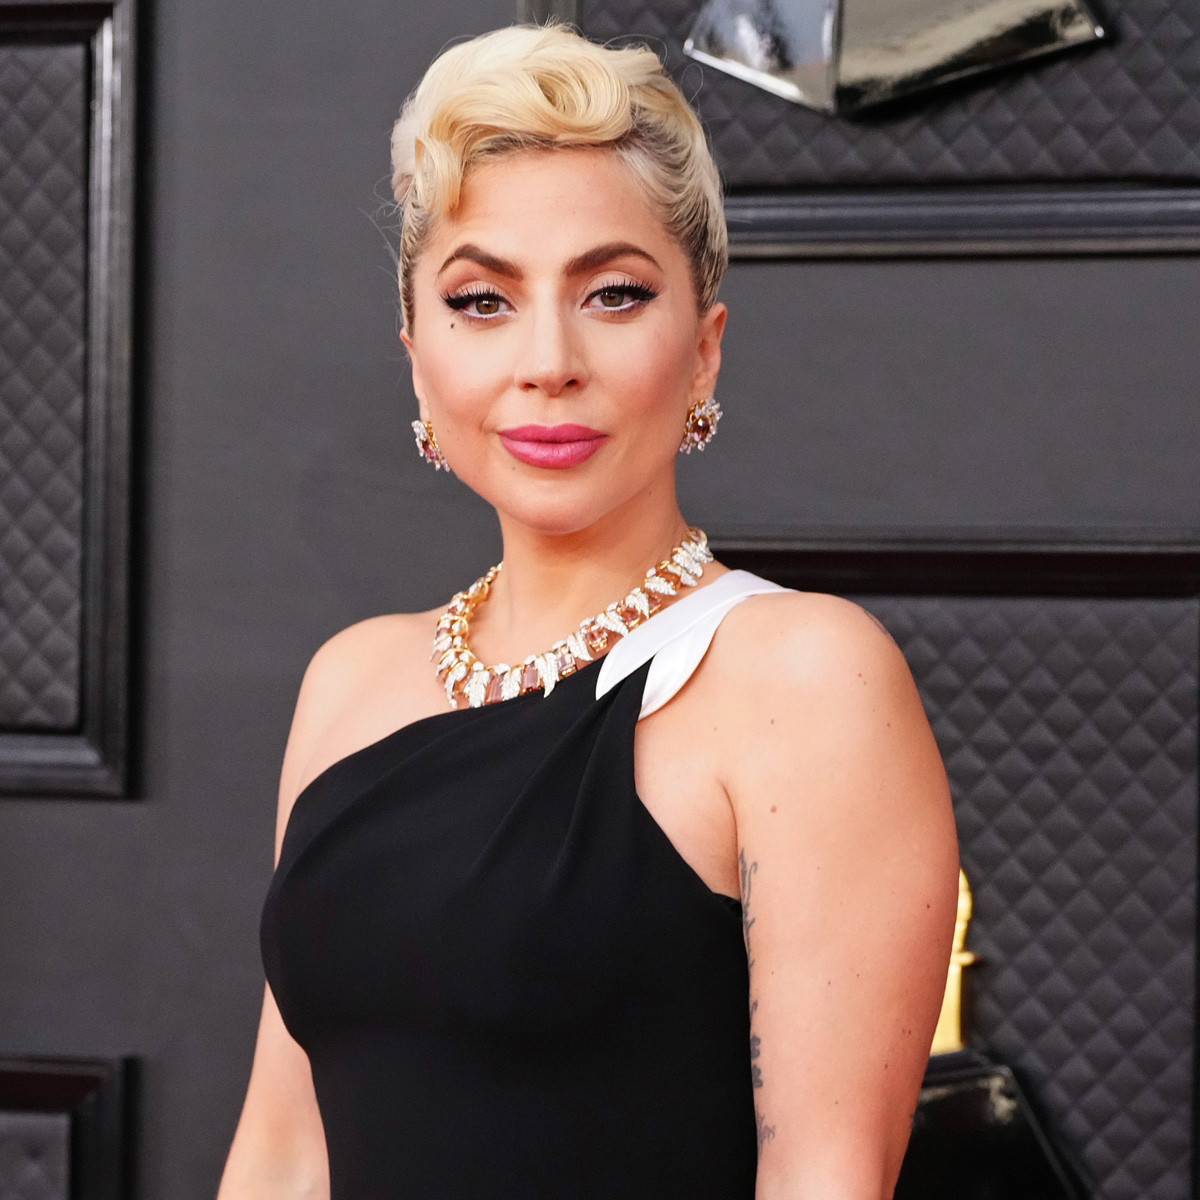 Lady Gaga Shares Update on Why She’s Been “So Private” Lately